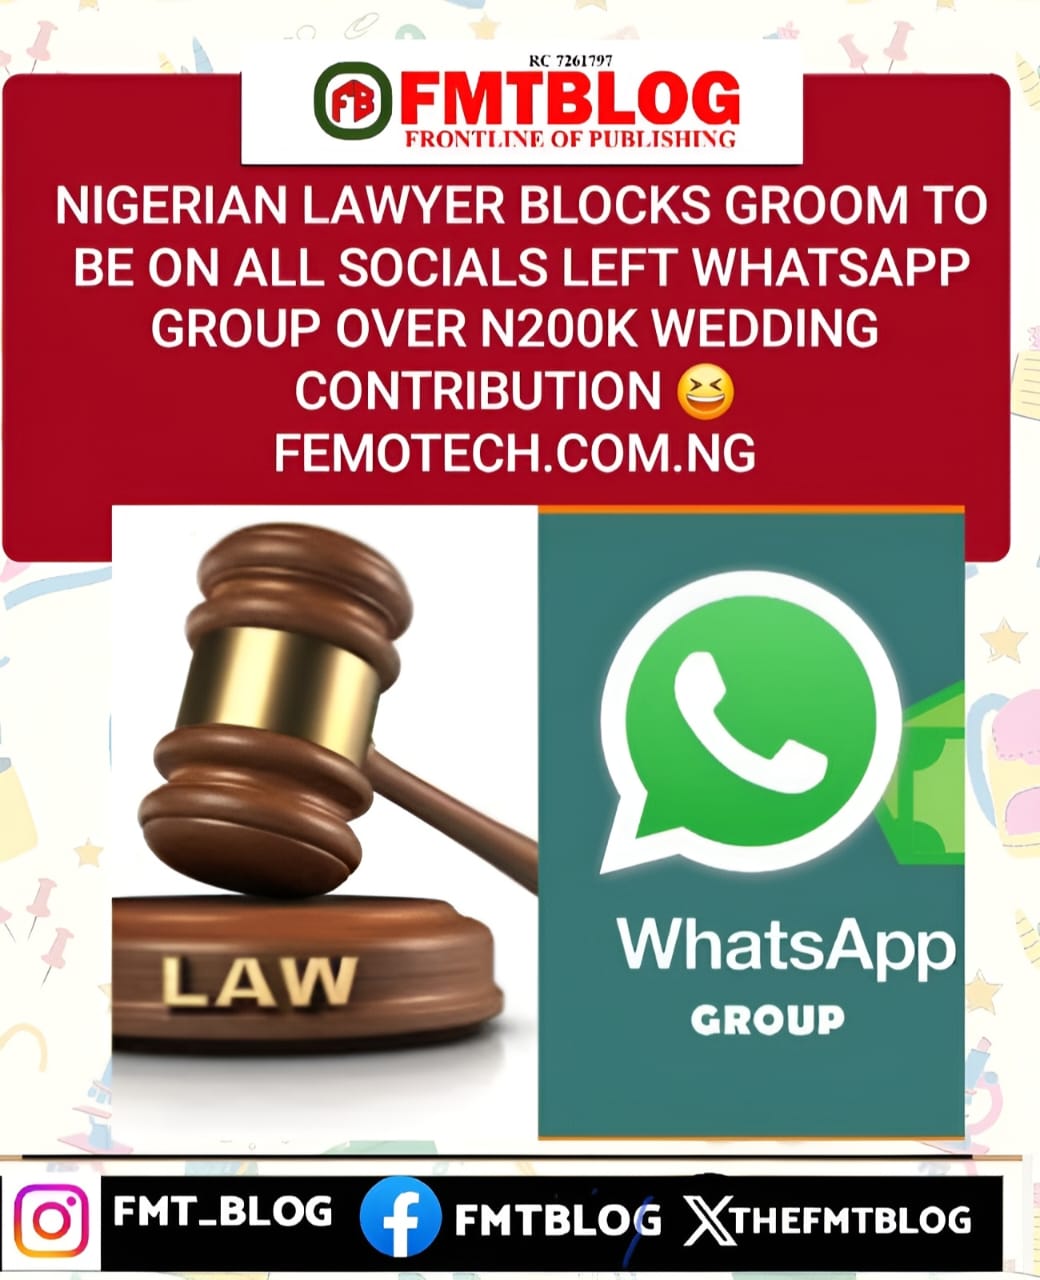 Nigerian Lawyer Blocks Groom To Be On All Socials, Left WhatsApp Group Over N200K Wedding Contribution😂